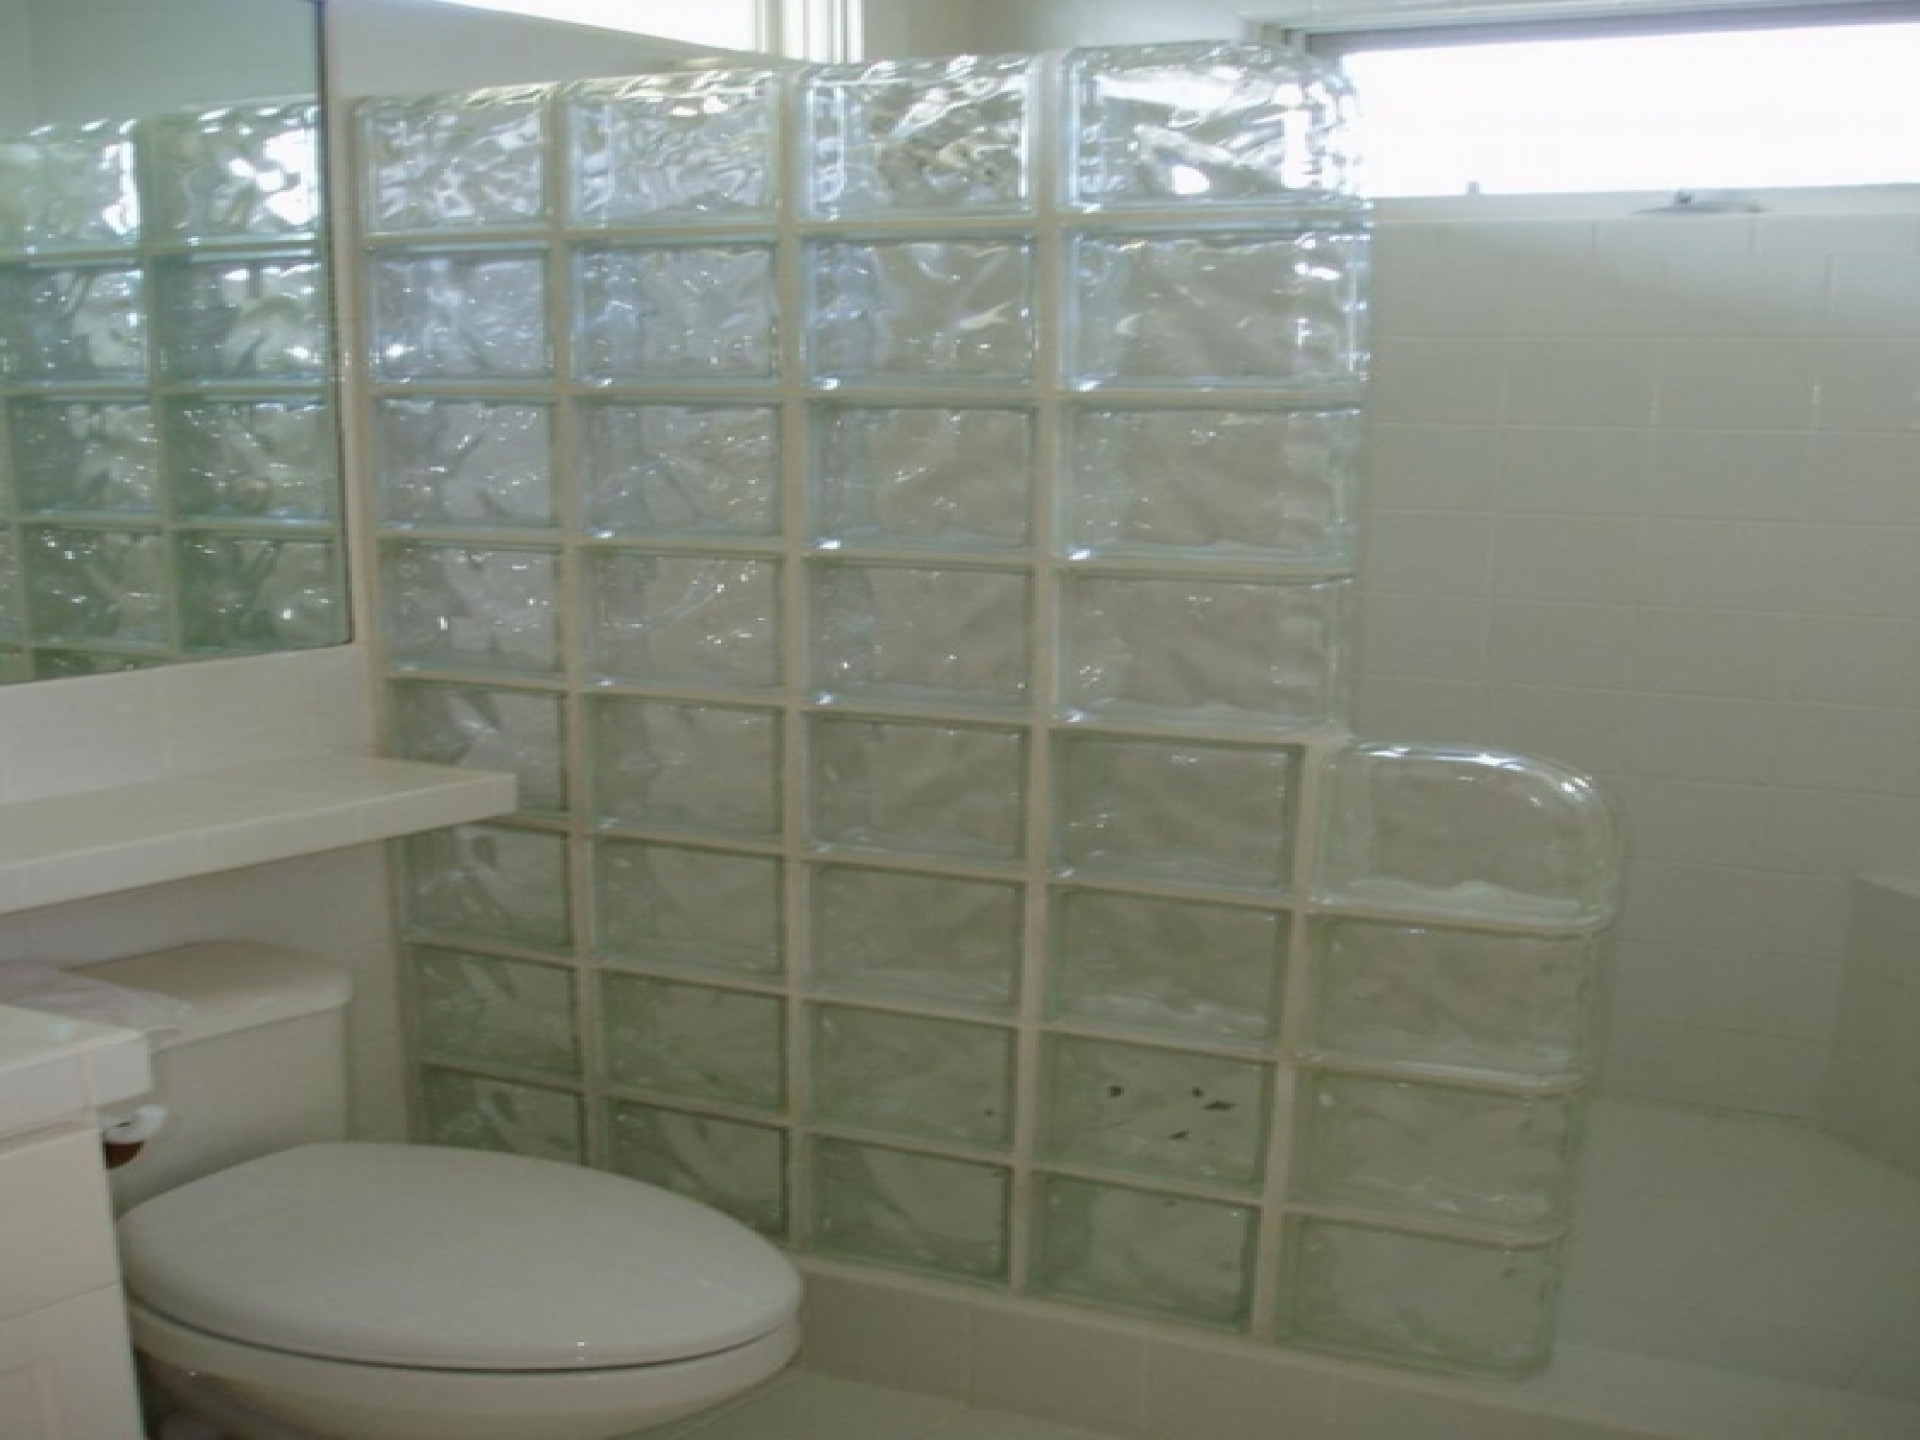 Glass Tile Bathroom Ideas
 40 great pictures and ideas of 1920s bathroom tile designs